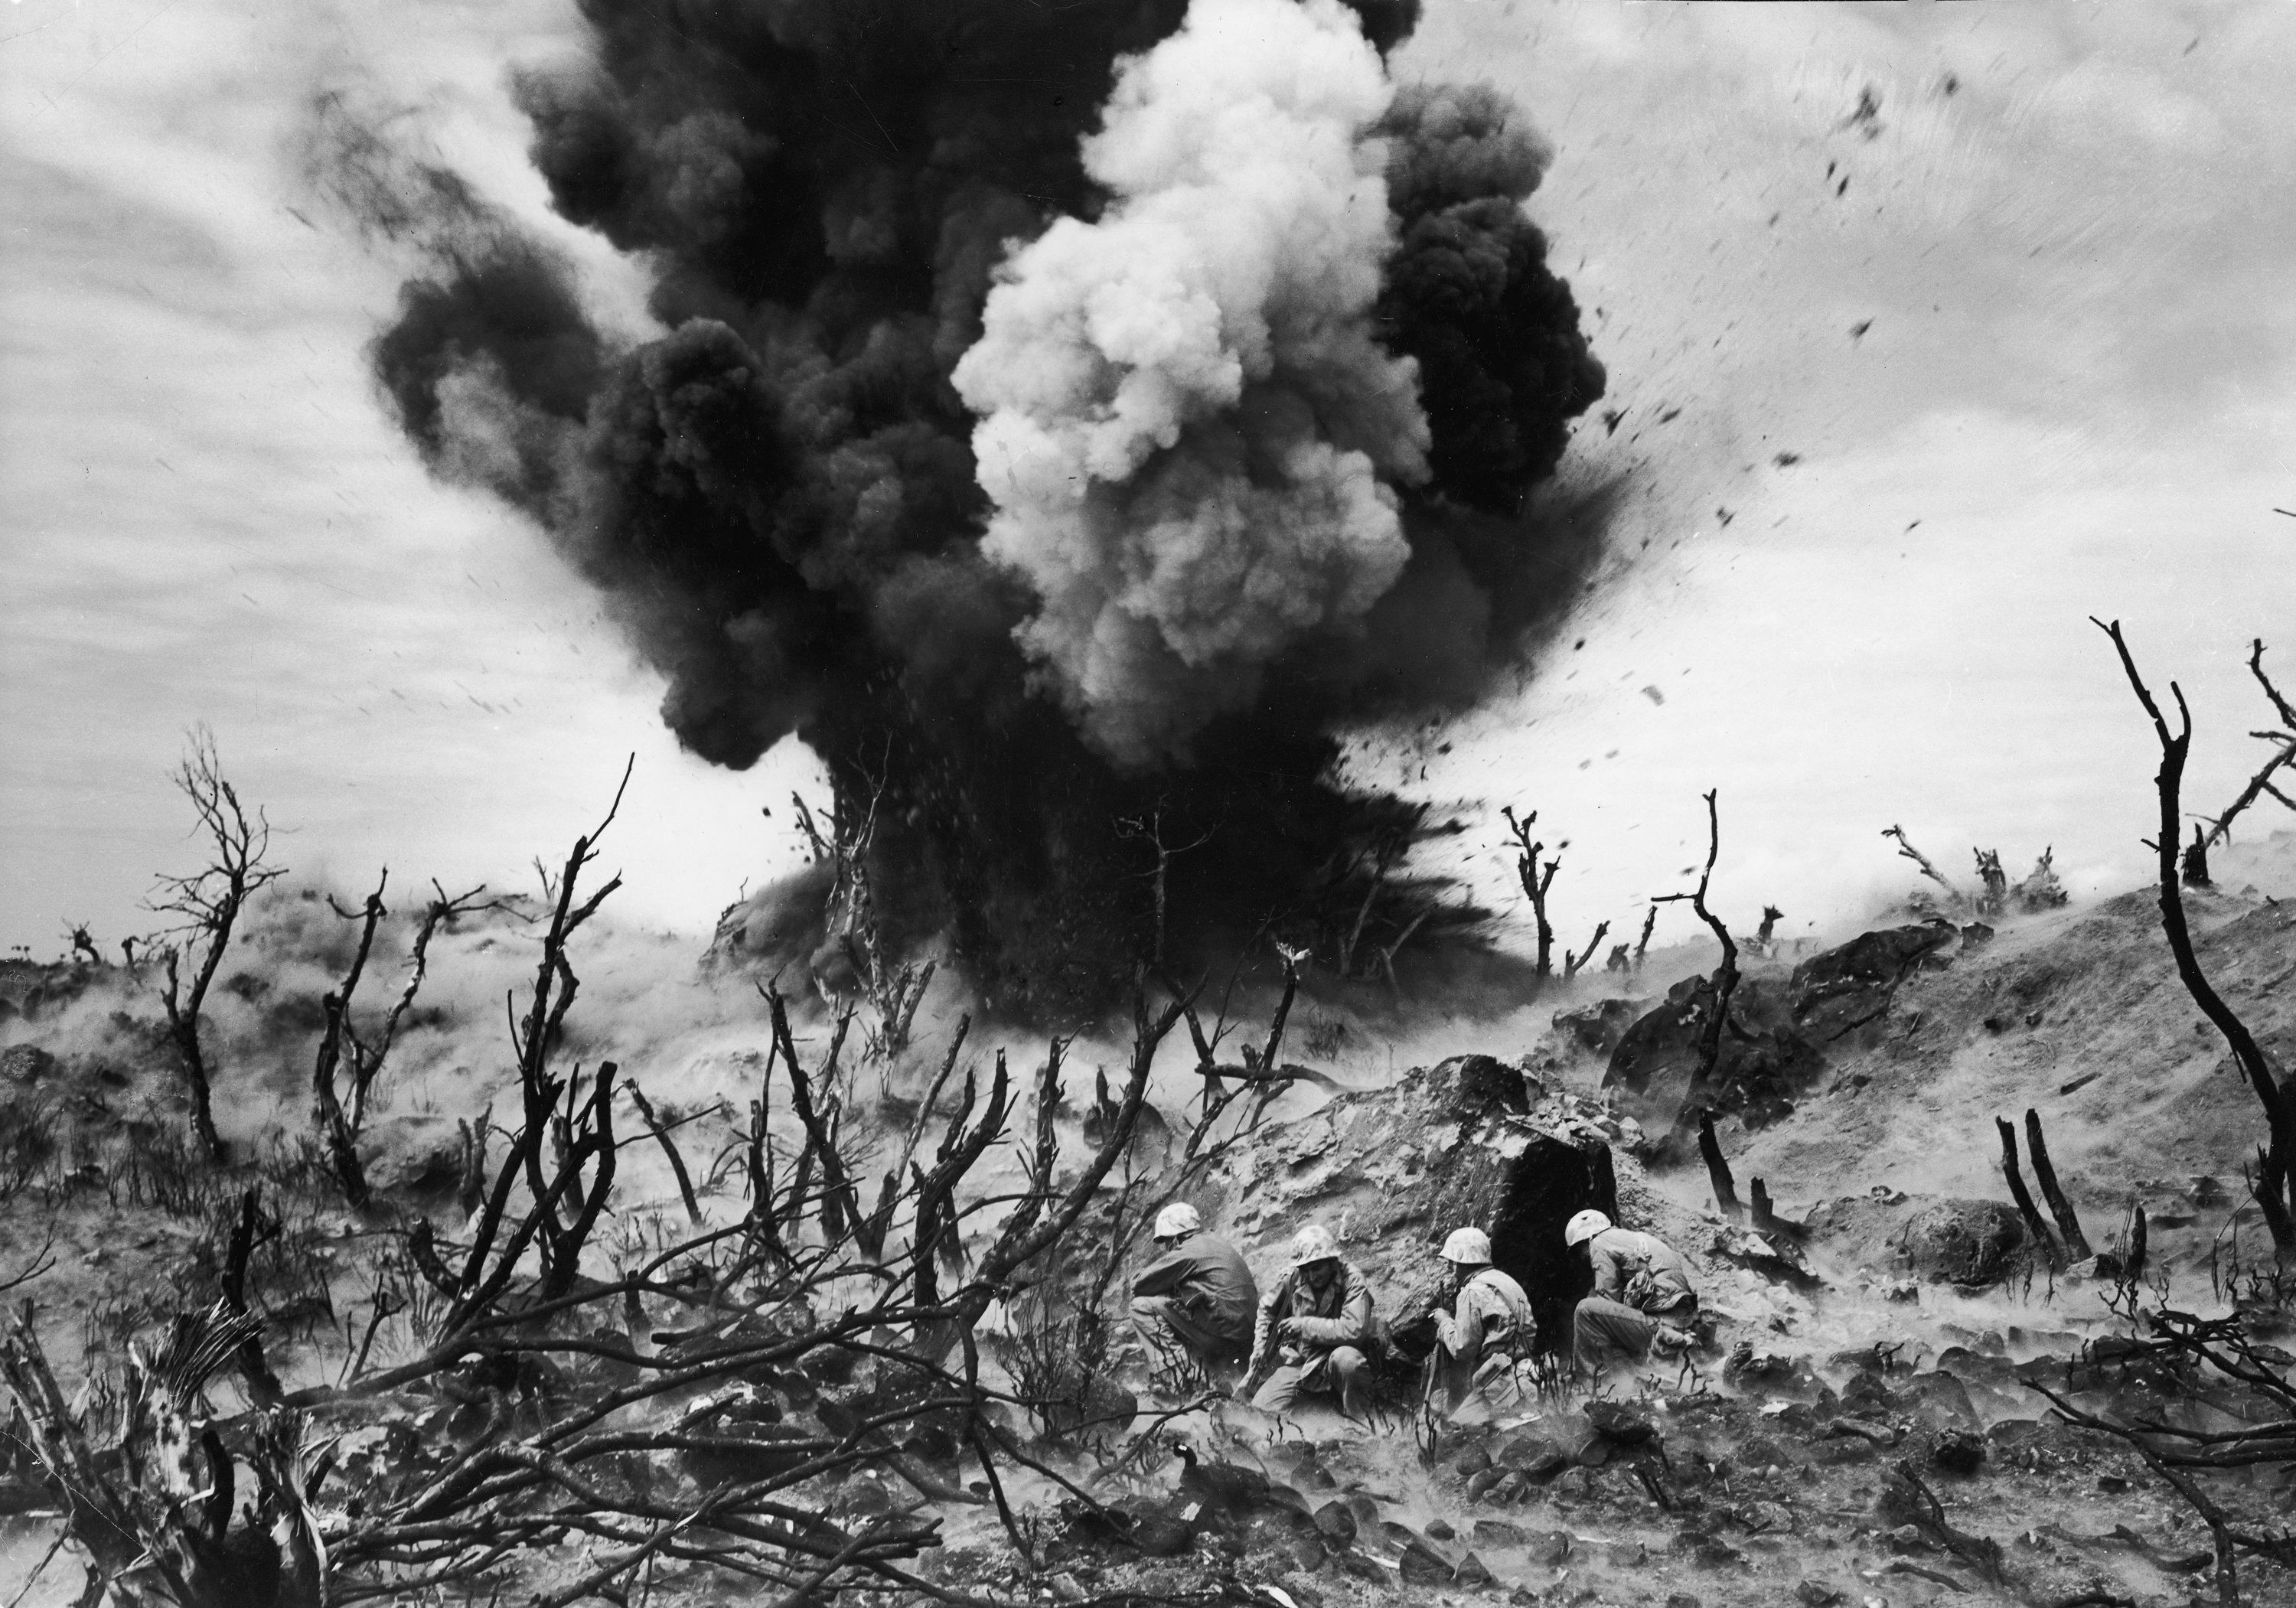 United States Marines (foreground) blow up a cave connected to a Japanese blockhouse on Iwo Jima, March 1945.